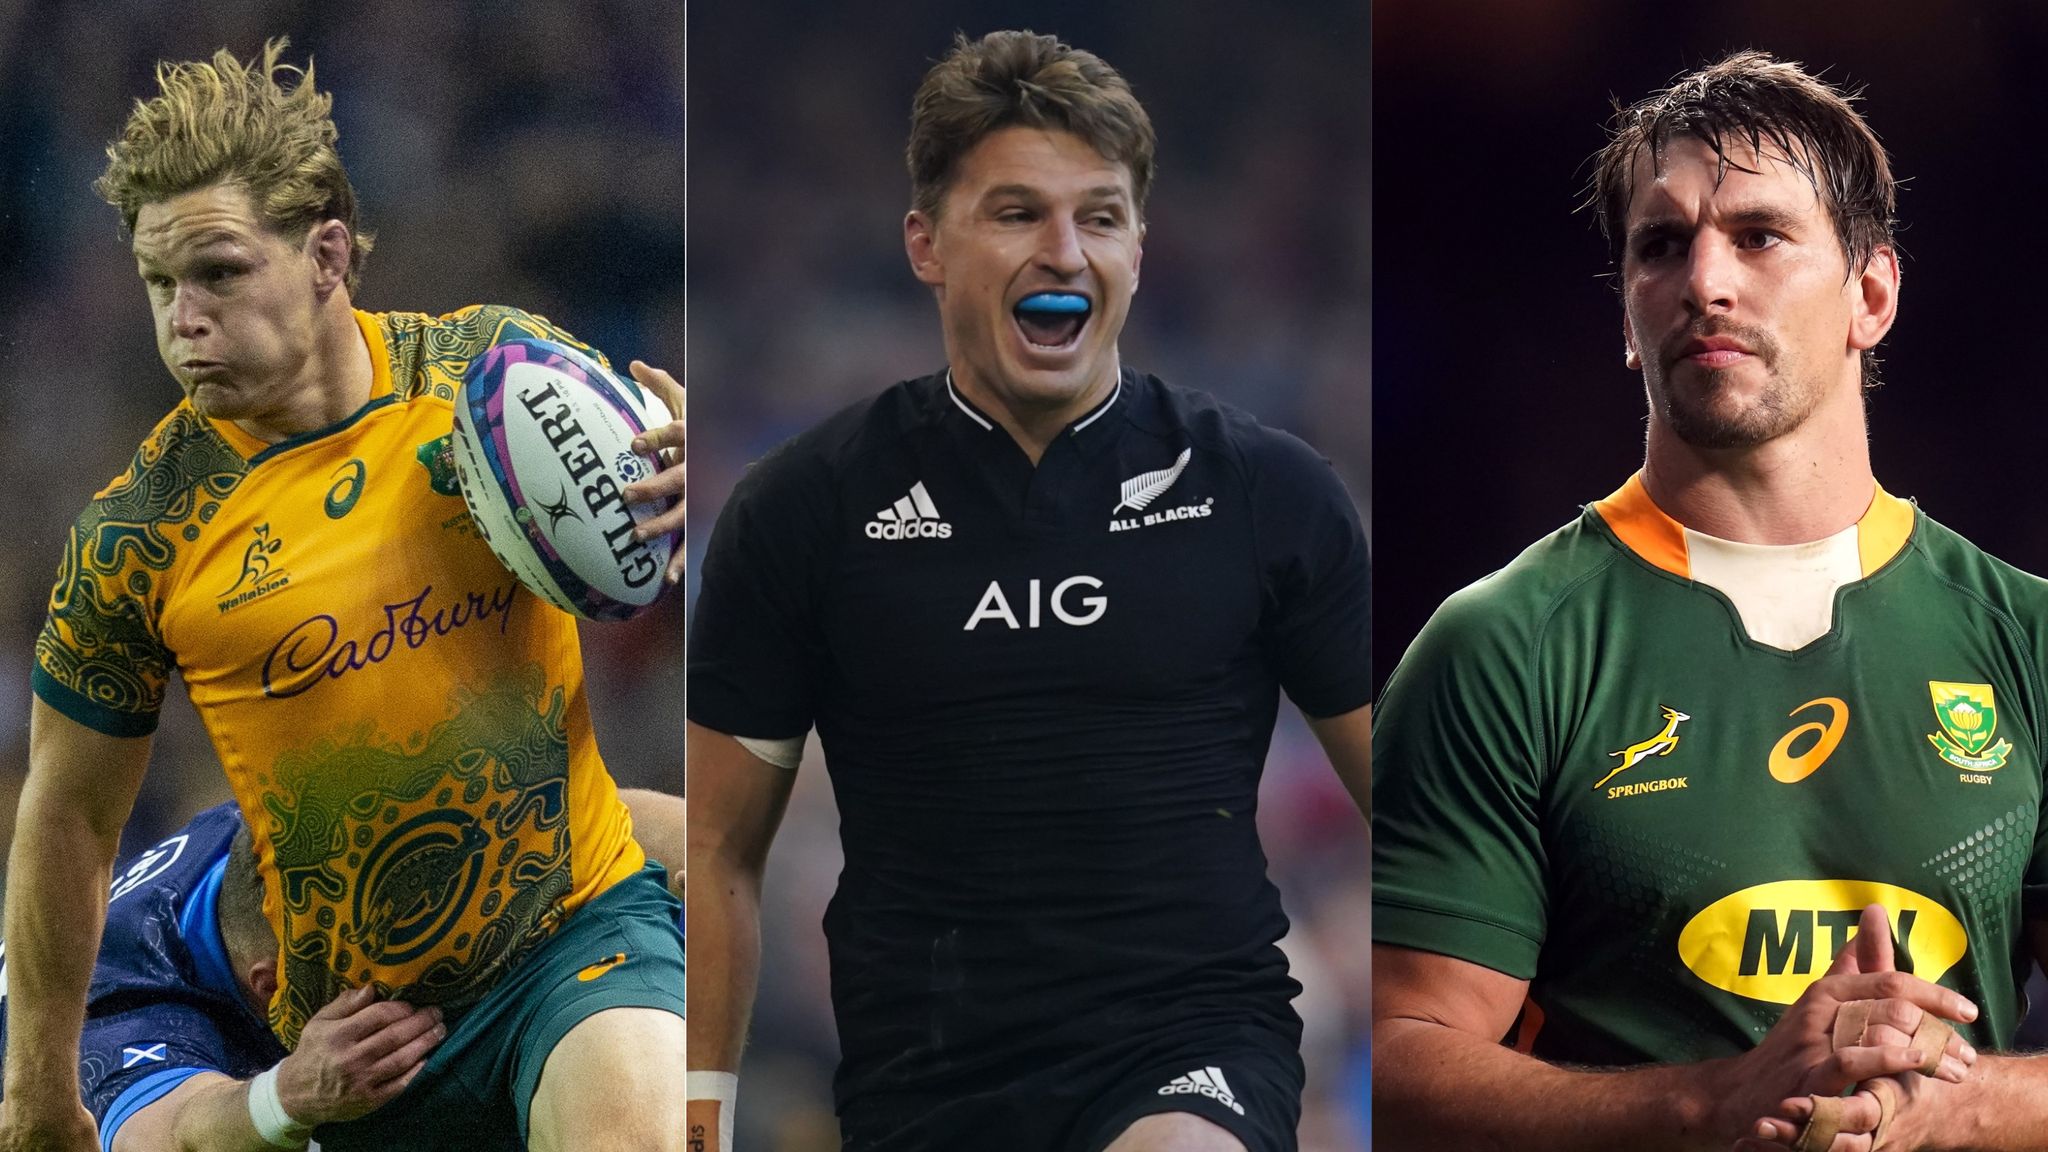 This is a new game, a new week”: All to play for in The Rugby Championship  2022